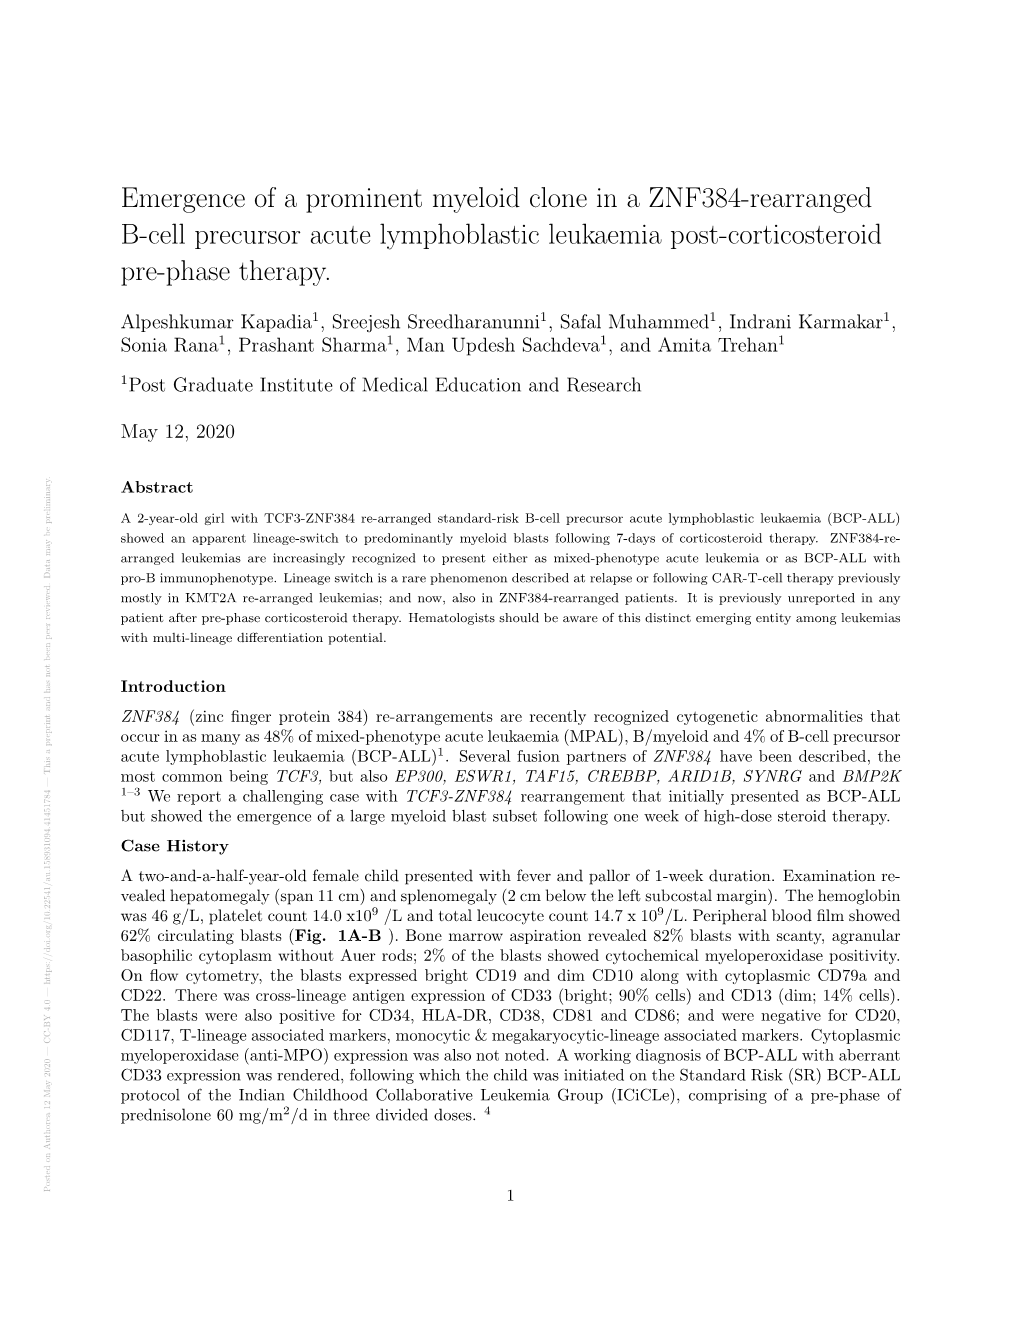 Emergence of a Prominent Myeloid Clone in a ZNF384-Rearranged B-Cell Precursor Acute Lymphoblastic Leukaemia Post-Corticosteroid